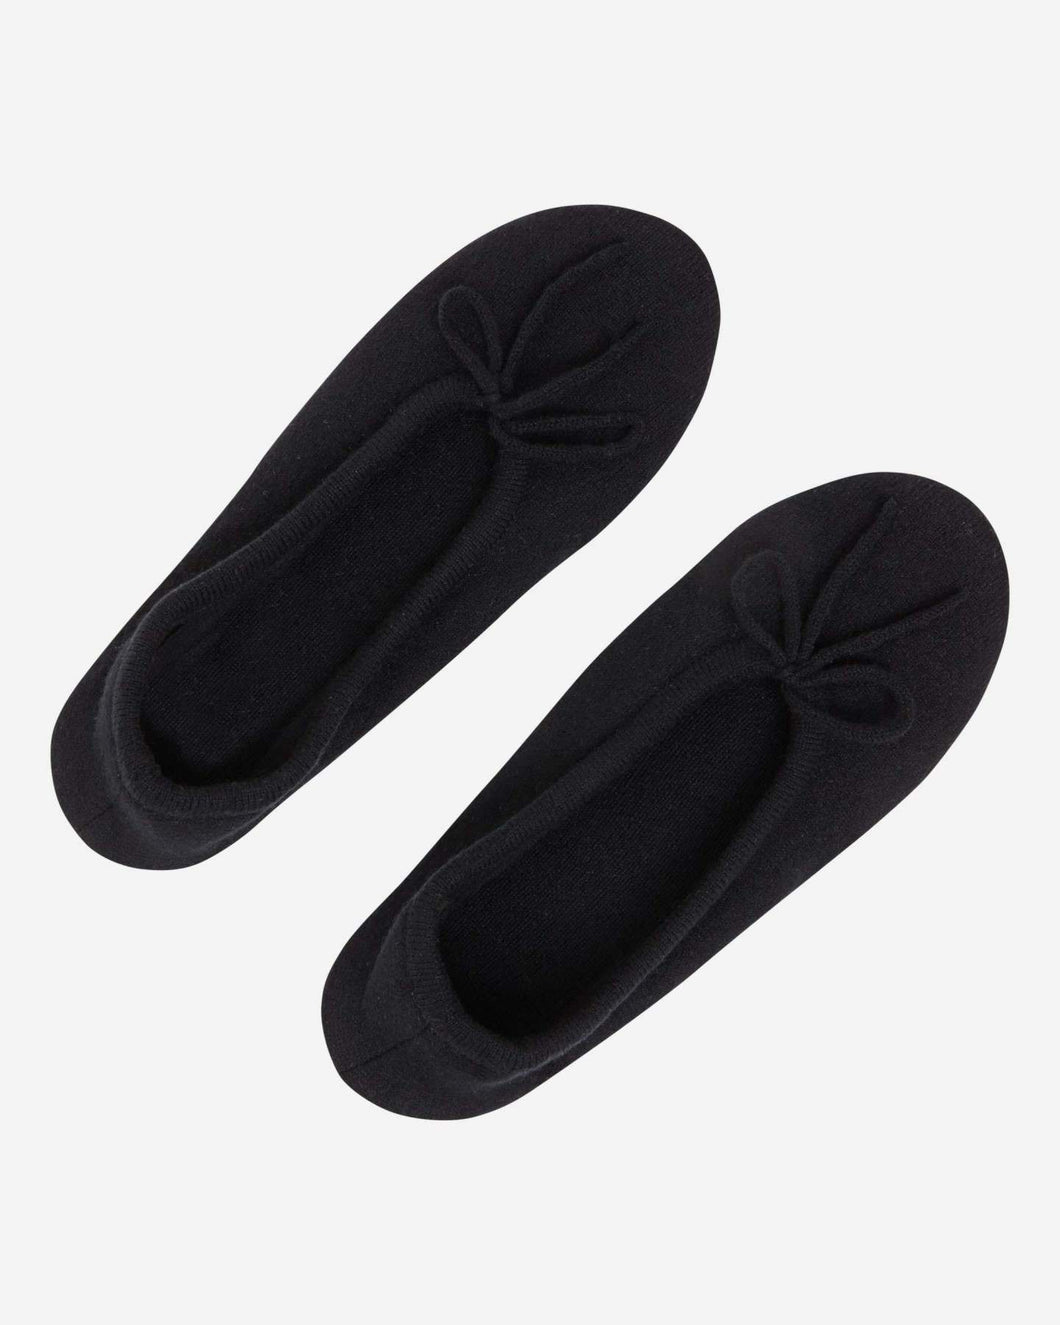 N.Peal Women's Cashmere Slippers Black